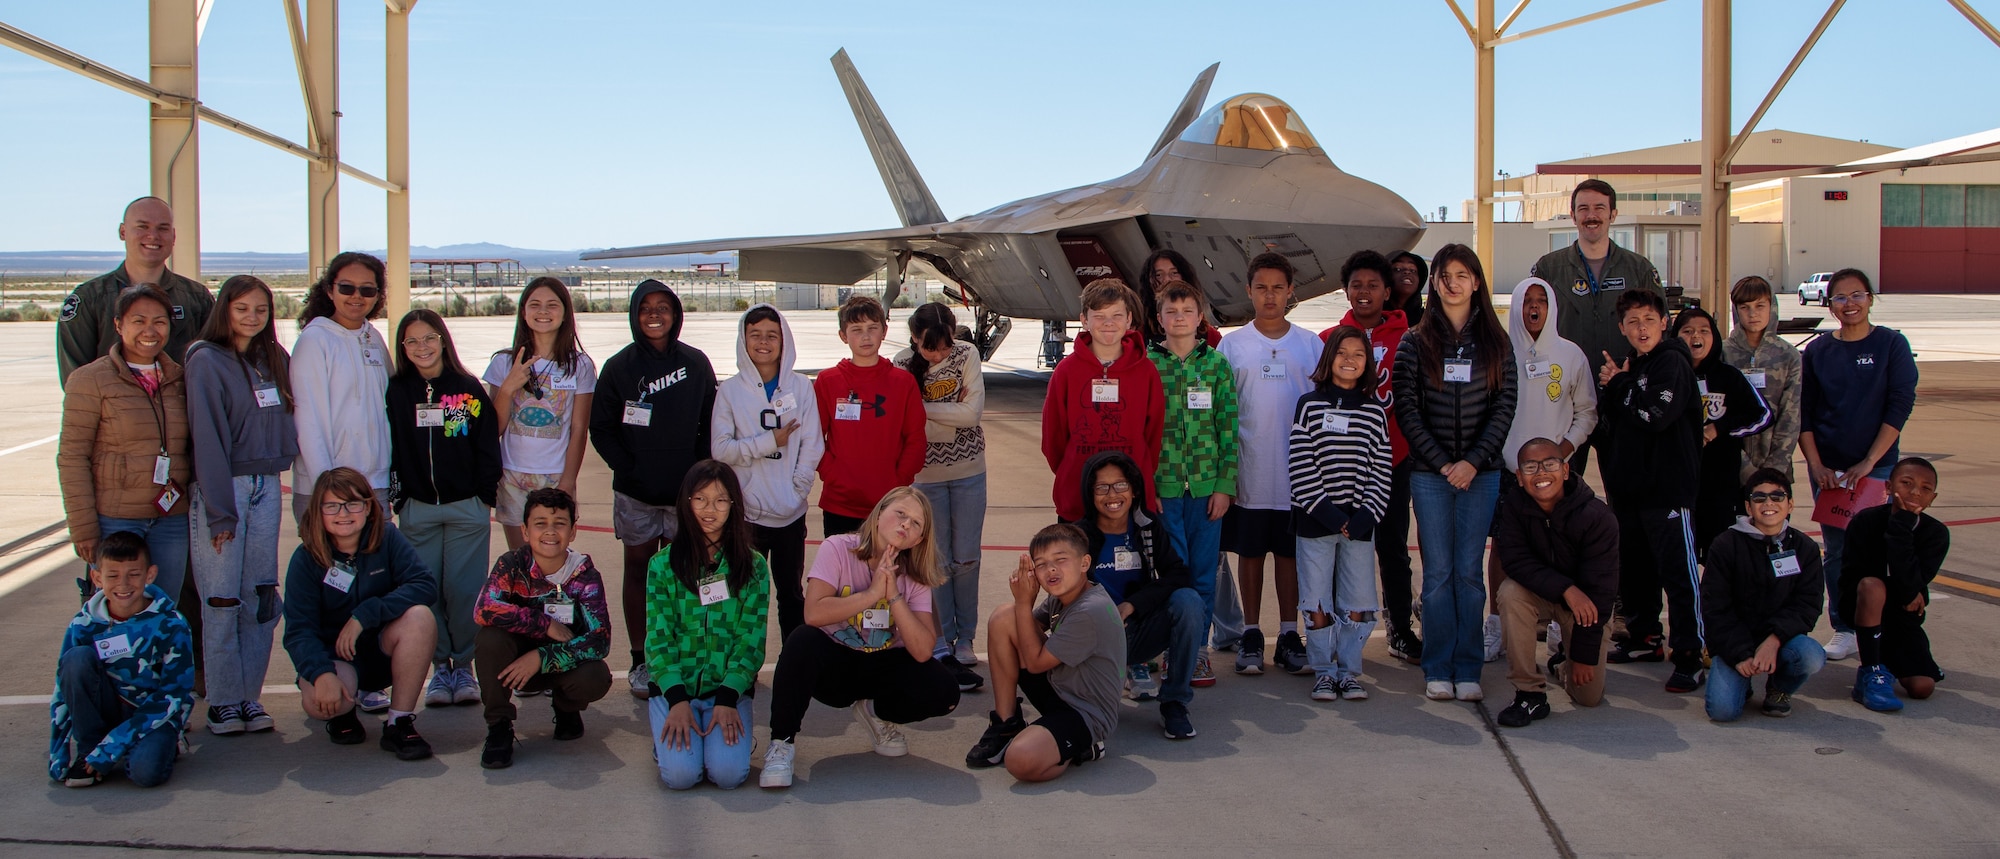 In partnership with STARBASE, the 411th Flight Test Squadron hosted 35 students for an opportunity of a lifetime. They were to experience a flight simulator followed by a tour of the F-22 Raptor, the most advanced and sophisticated fighter jet in the world. (photo by Ethan Wagner, Lockheed Martin)